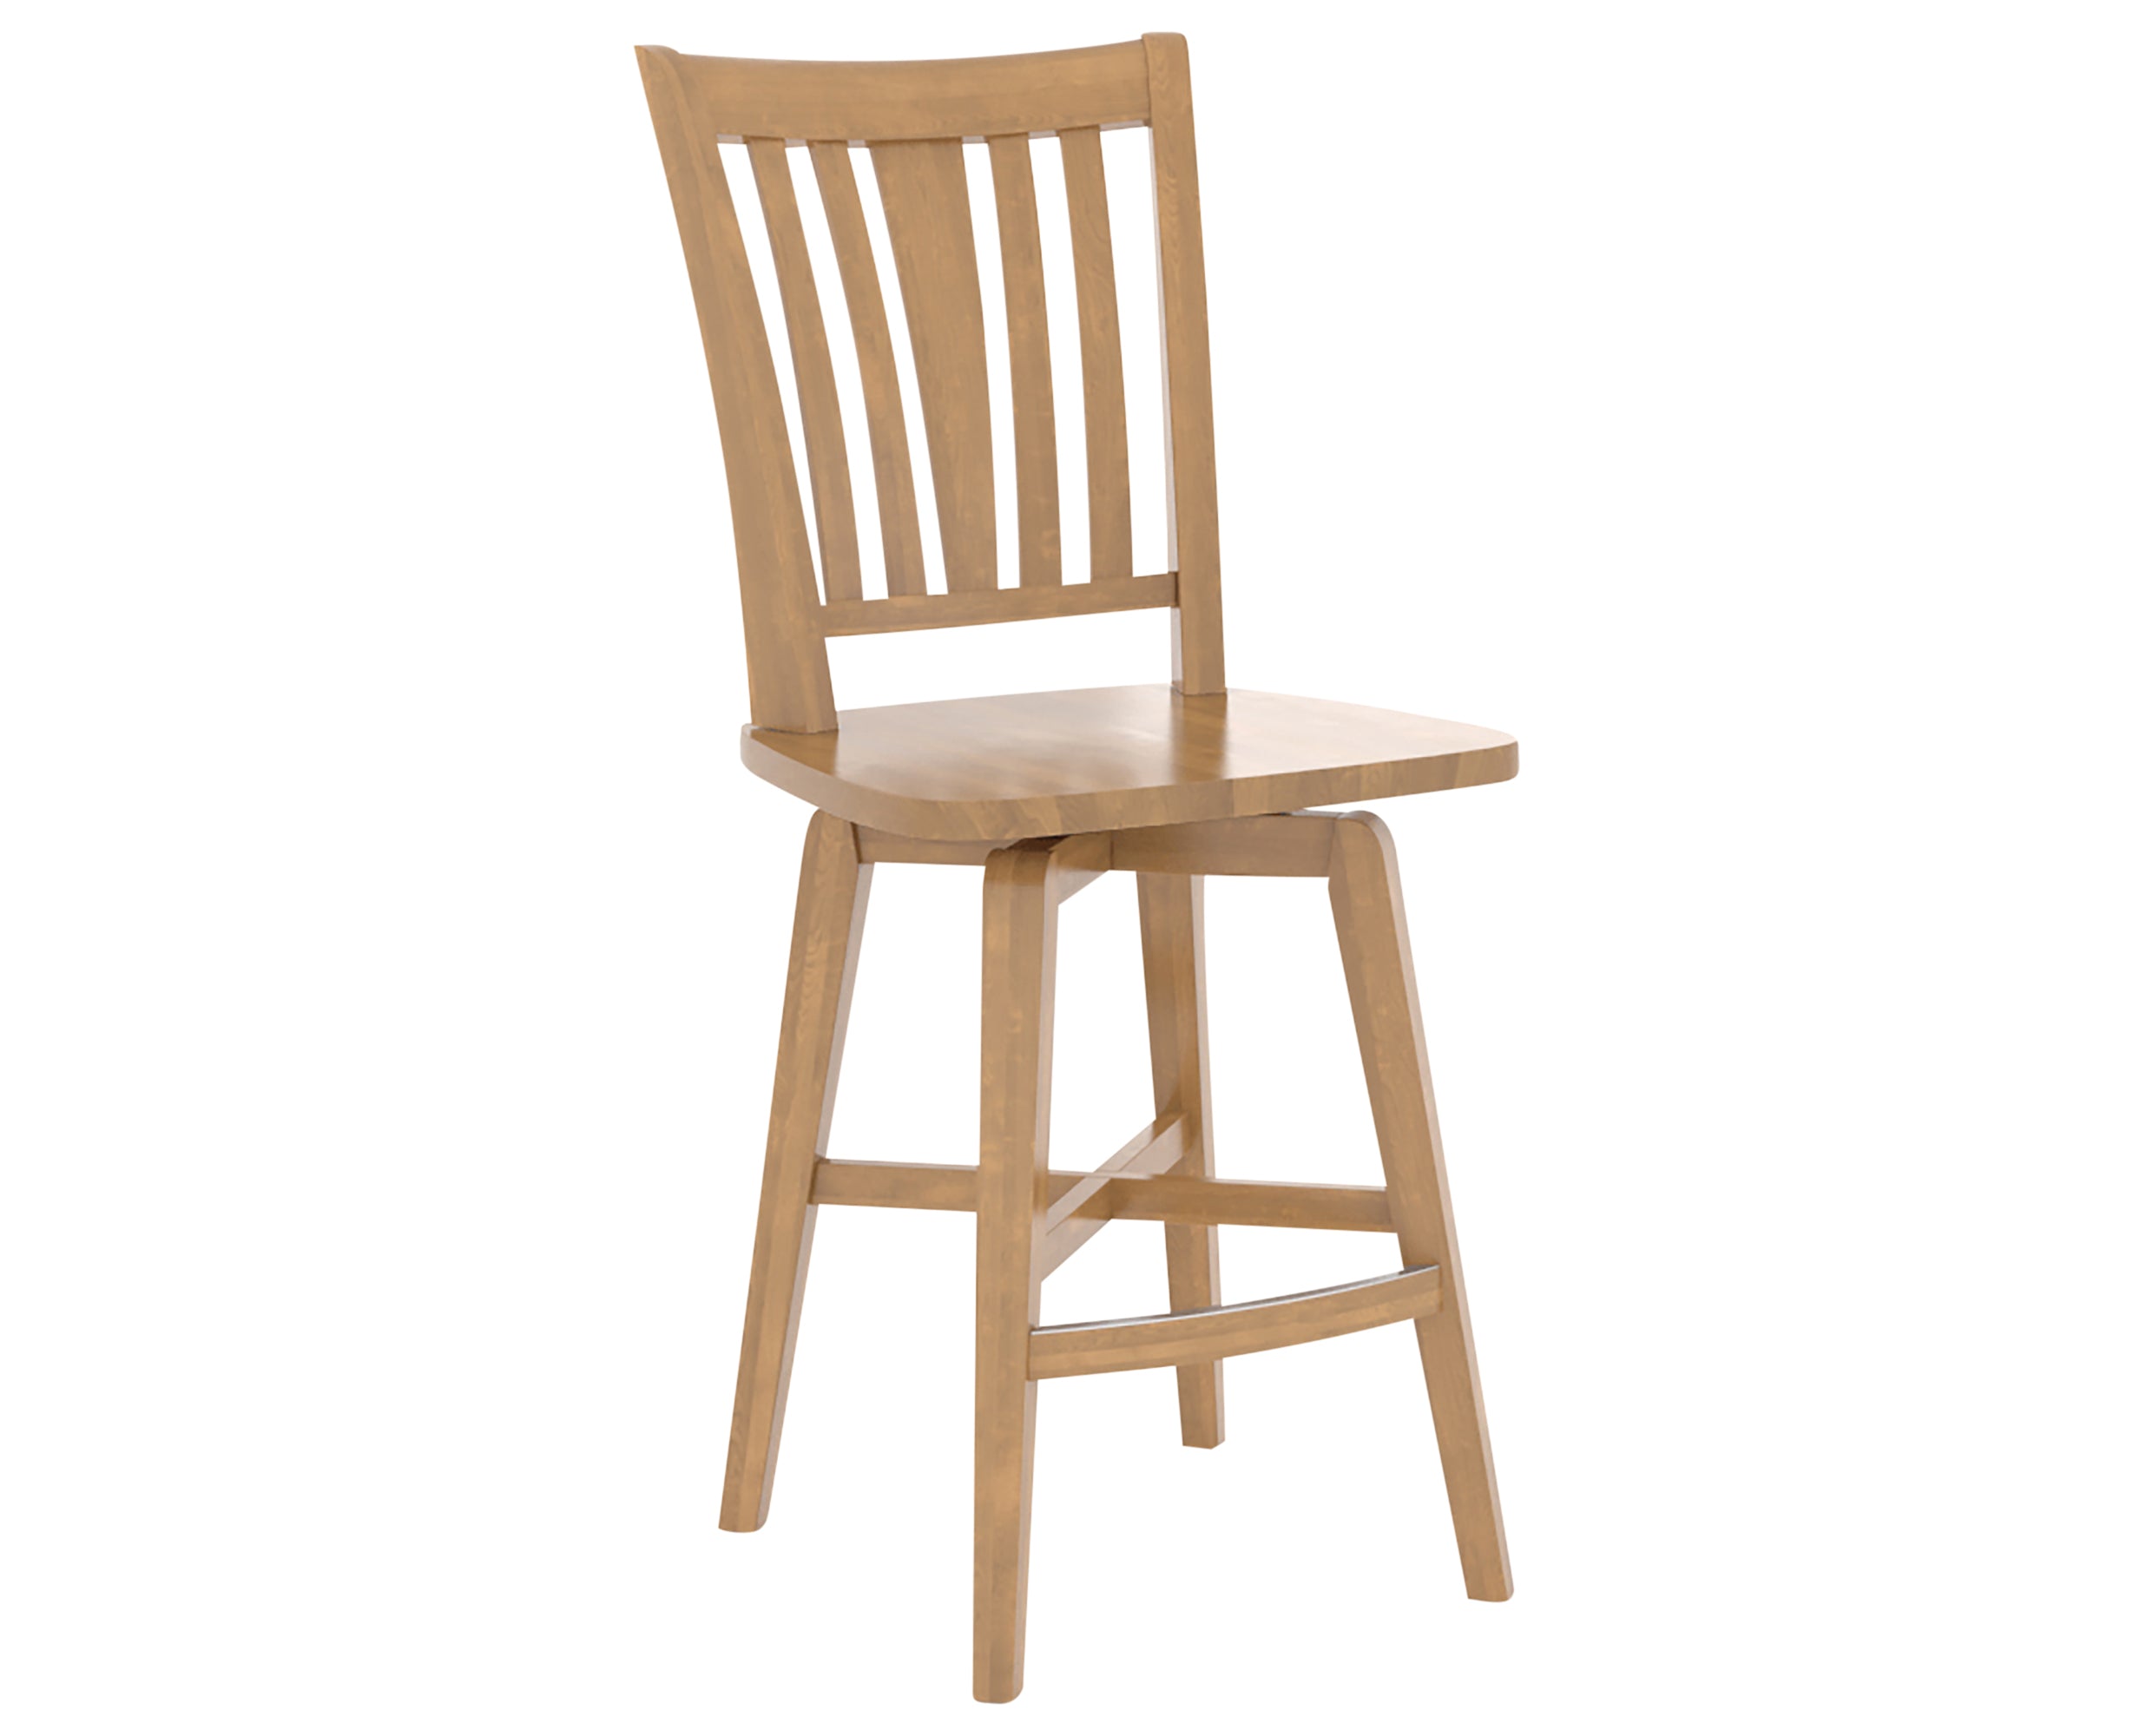 Honey Washed | Canadel Core Counter Stool 7351 | Valley Ridge Furniture